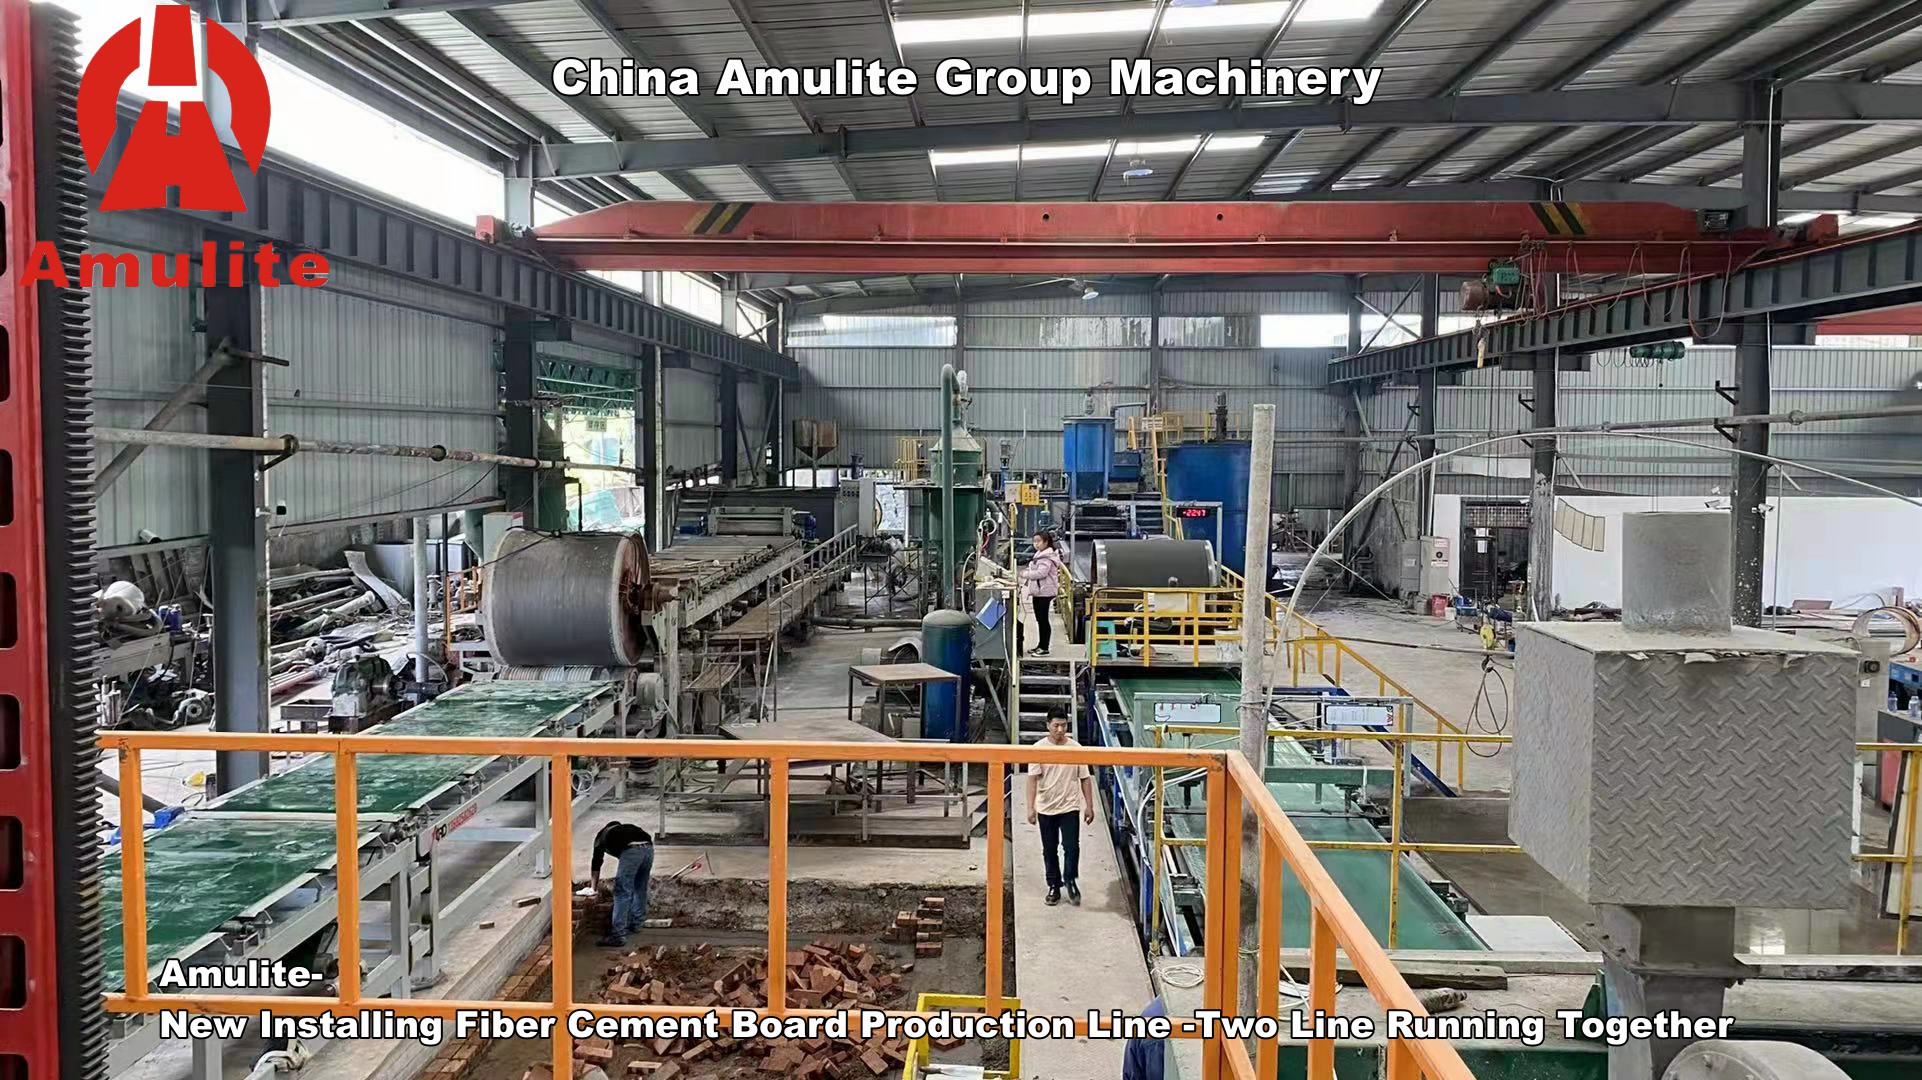 Amulite-New Installing Fiber Cement Board Production Line -Two Line Running Together